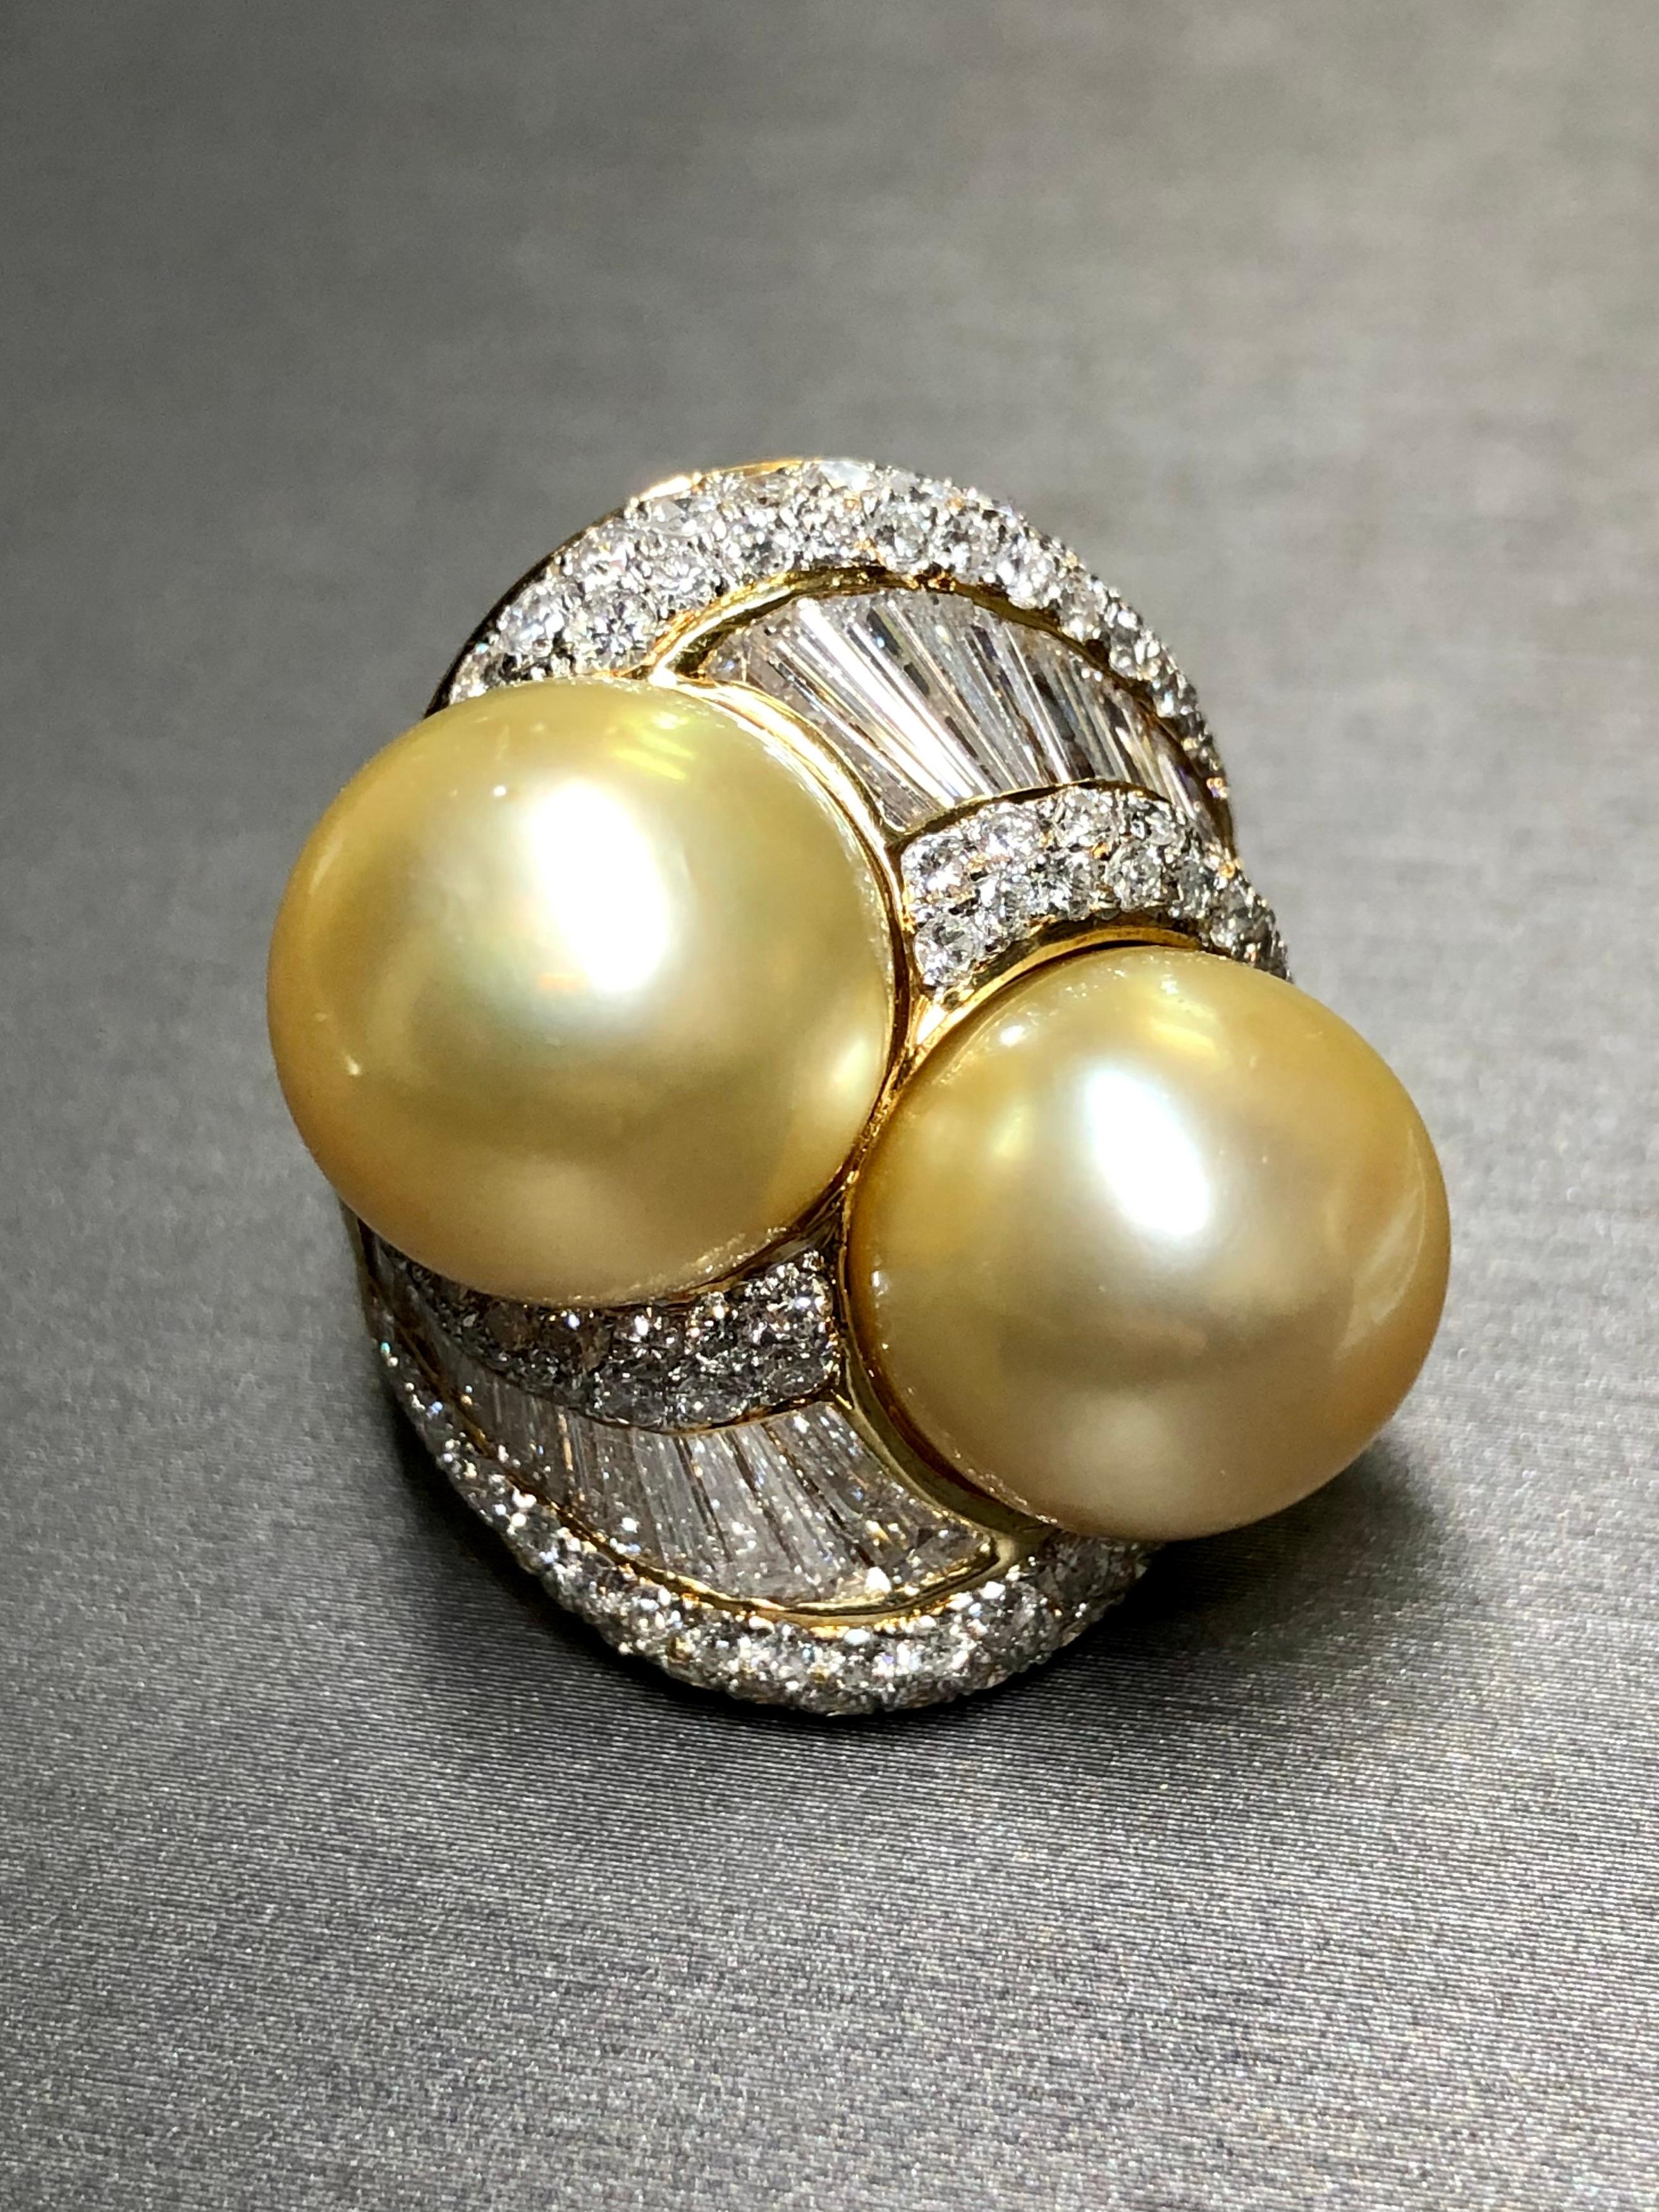 If you have ever wanted a ring with a presence, look no further. This fabulous piece is done in 18K yellow gold and set with approximately 4.50cttw in G-I color Vs1-Si1 clarity round and oversized, tapered baguette diamonds. Sitting next to each